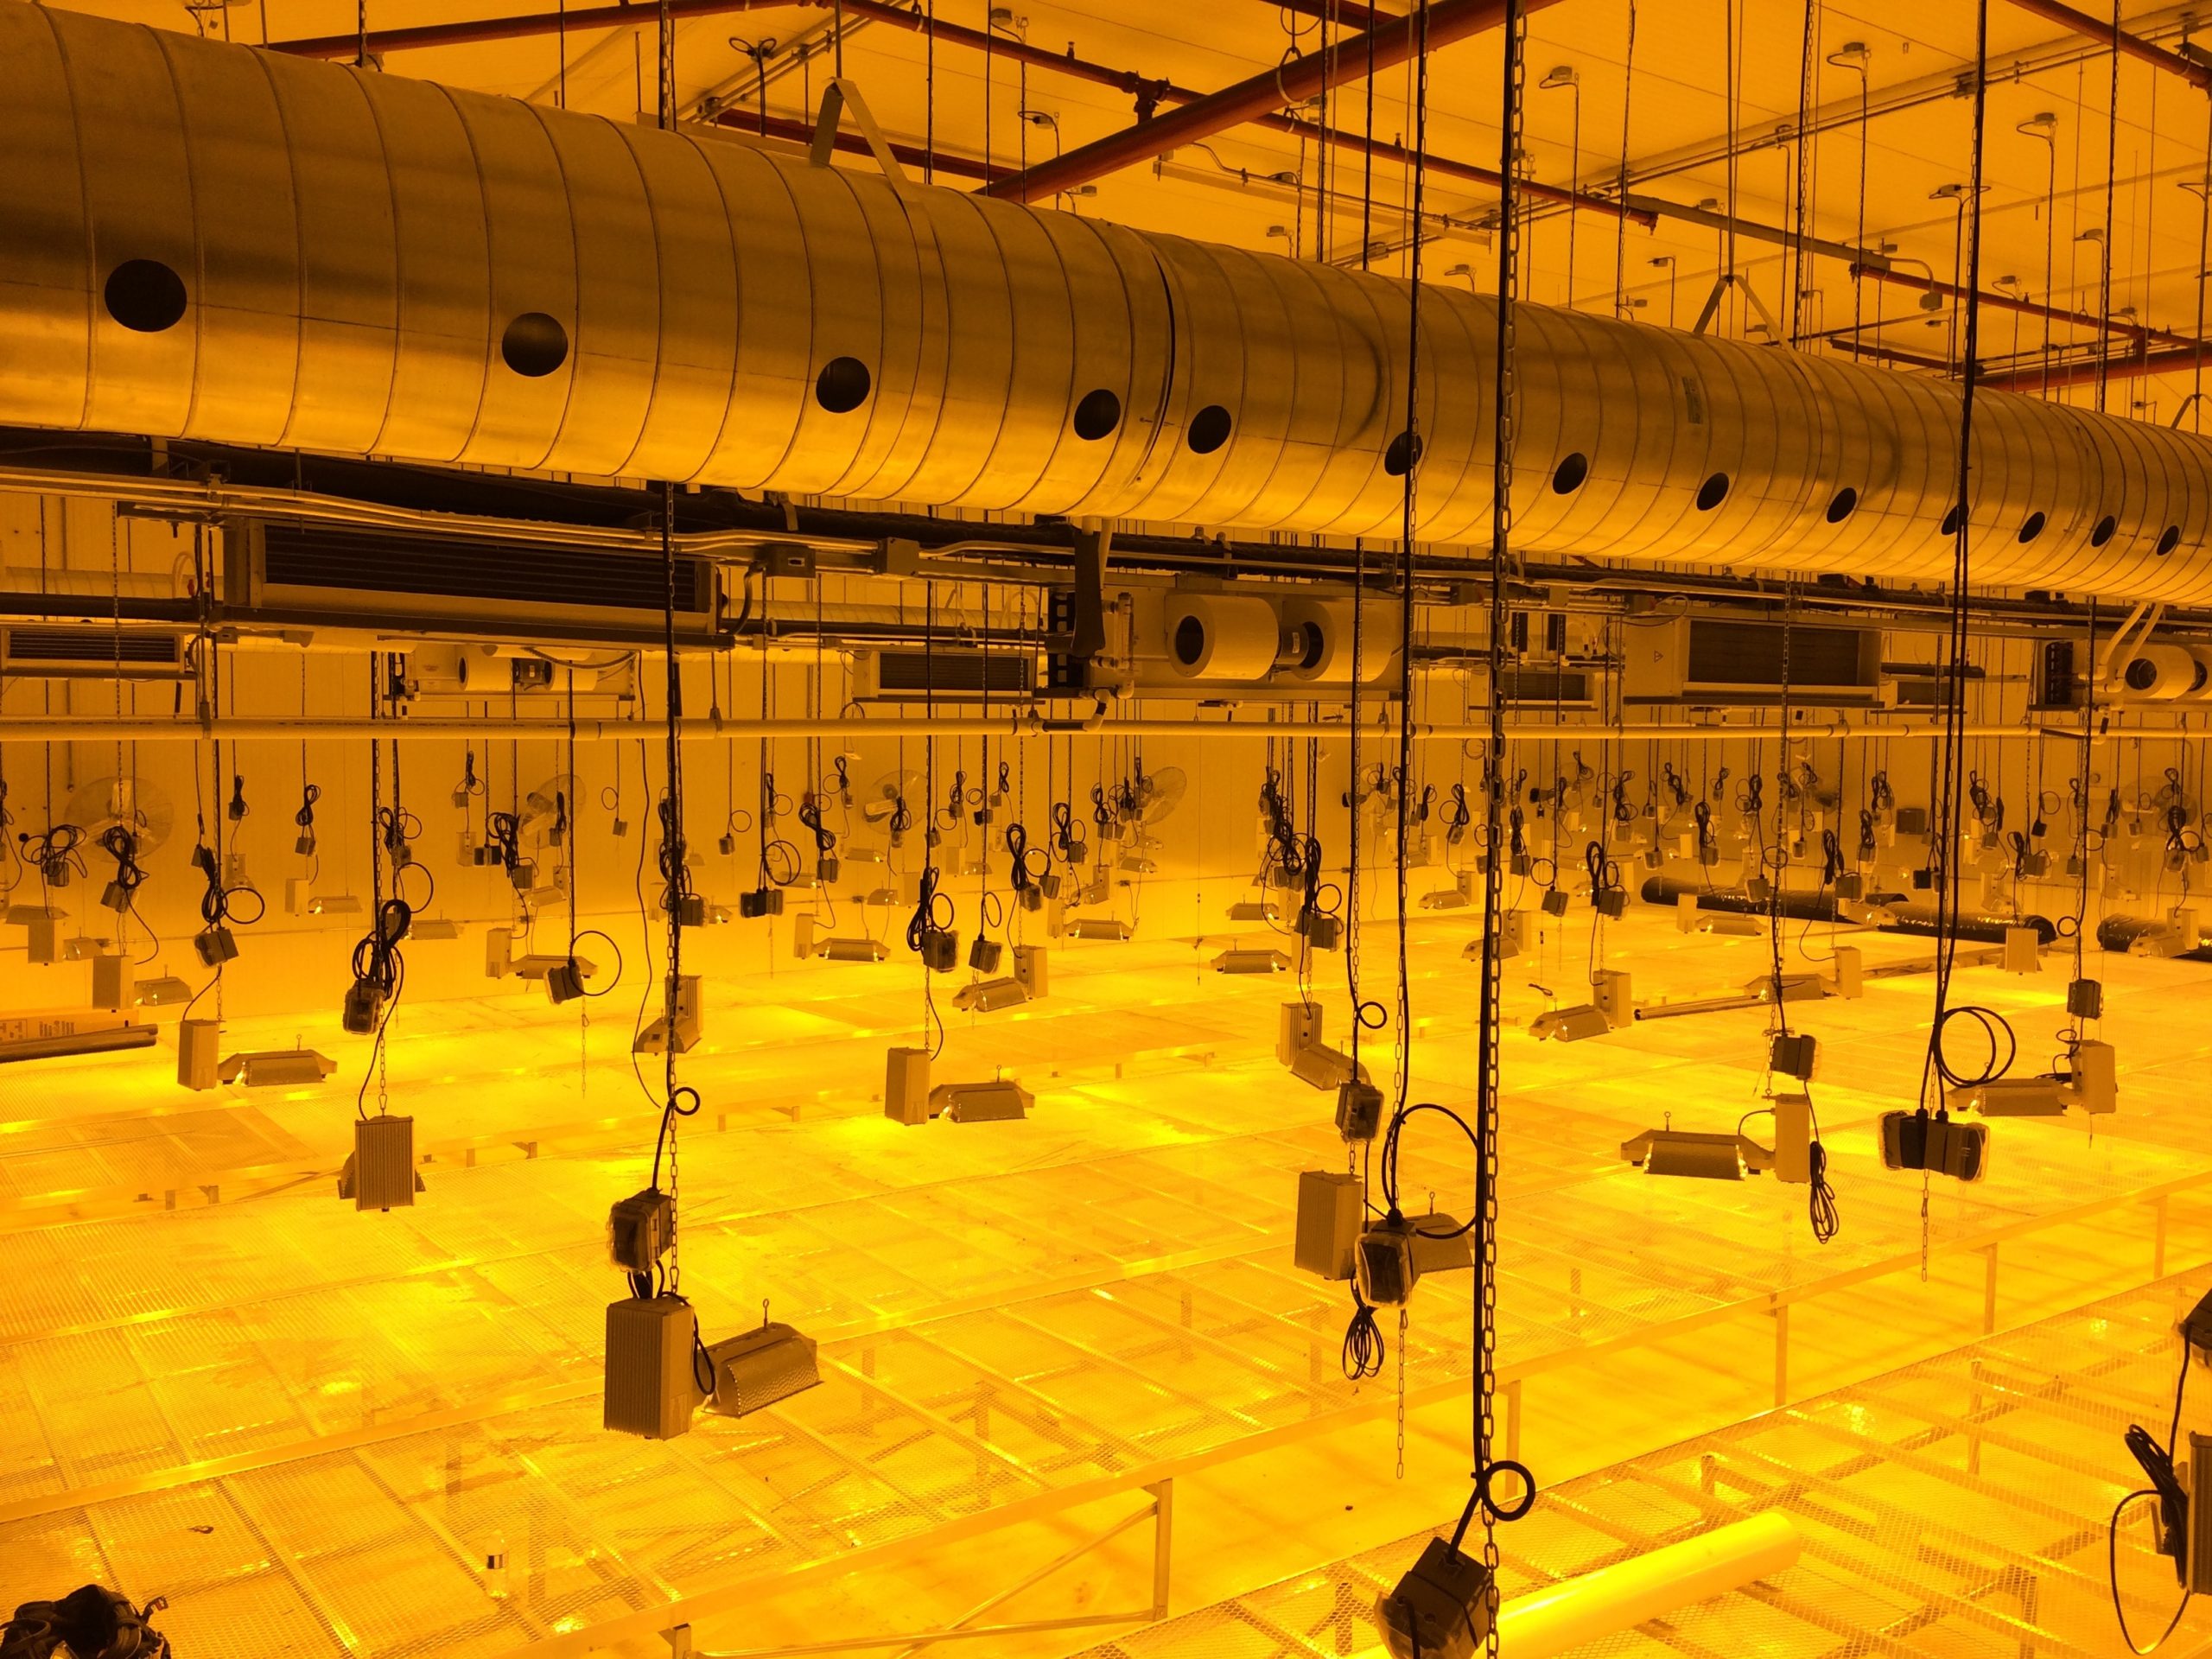 Commercial lighting for indoor cannabis cultivation